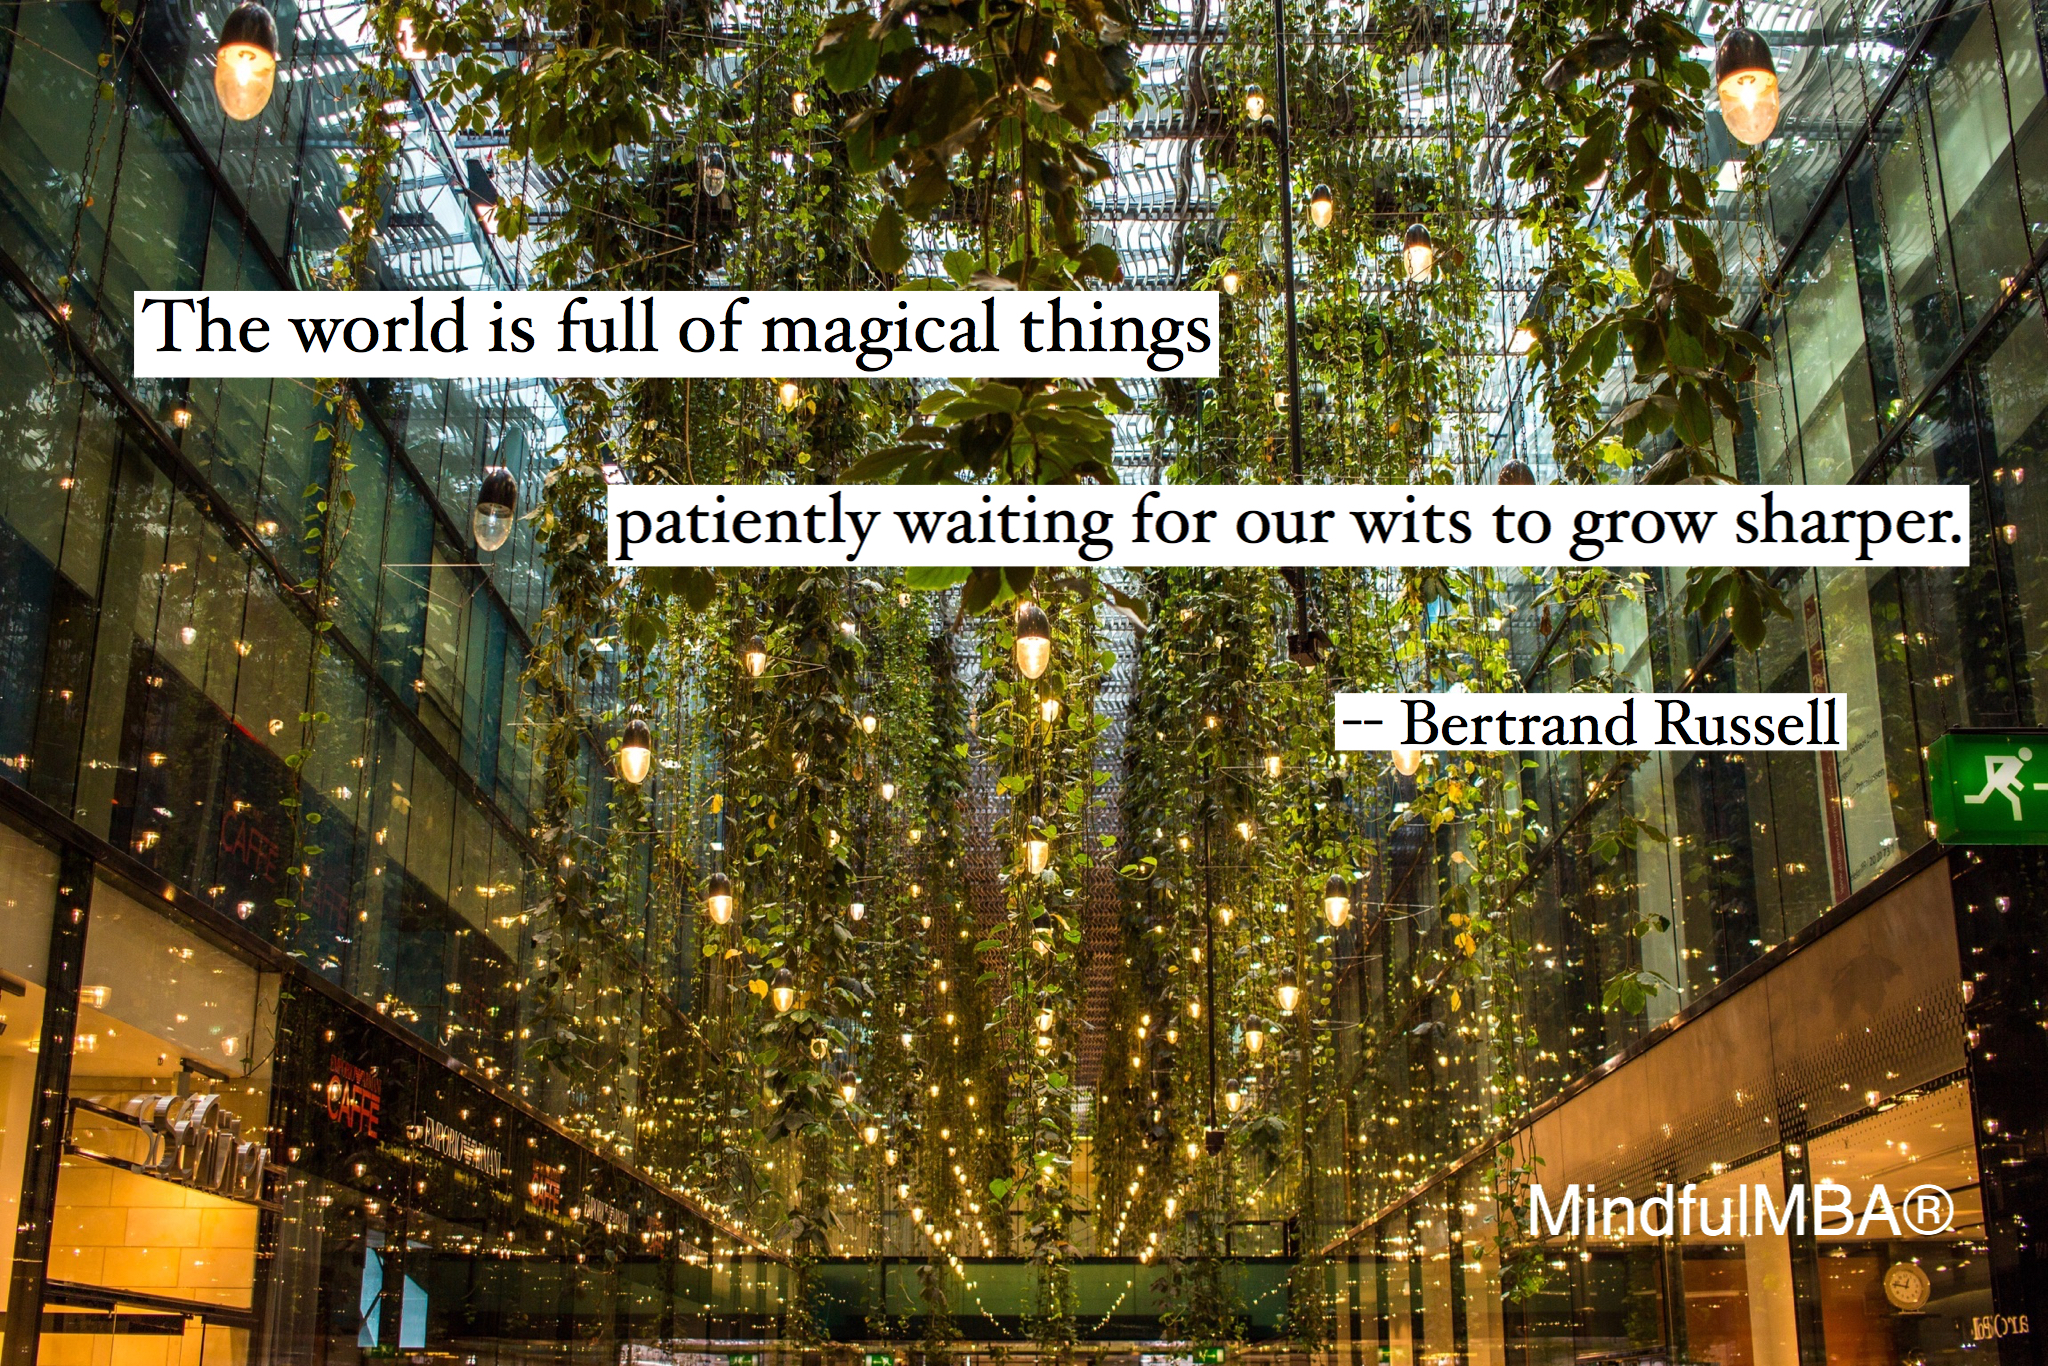 b-russell-magical-things-quote-w-tag